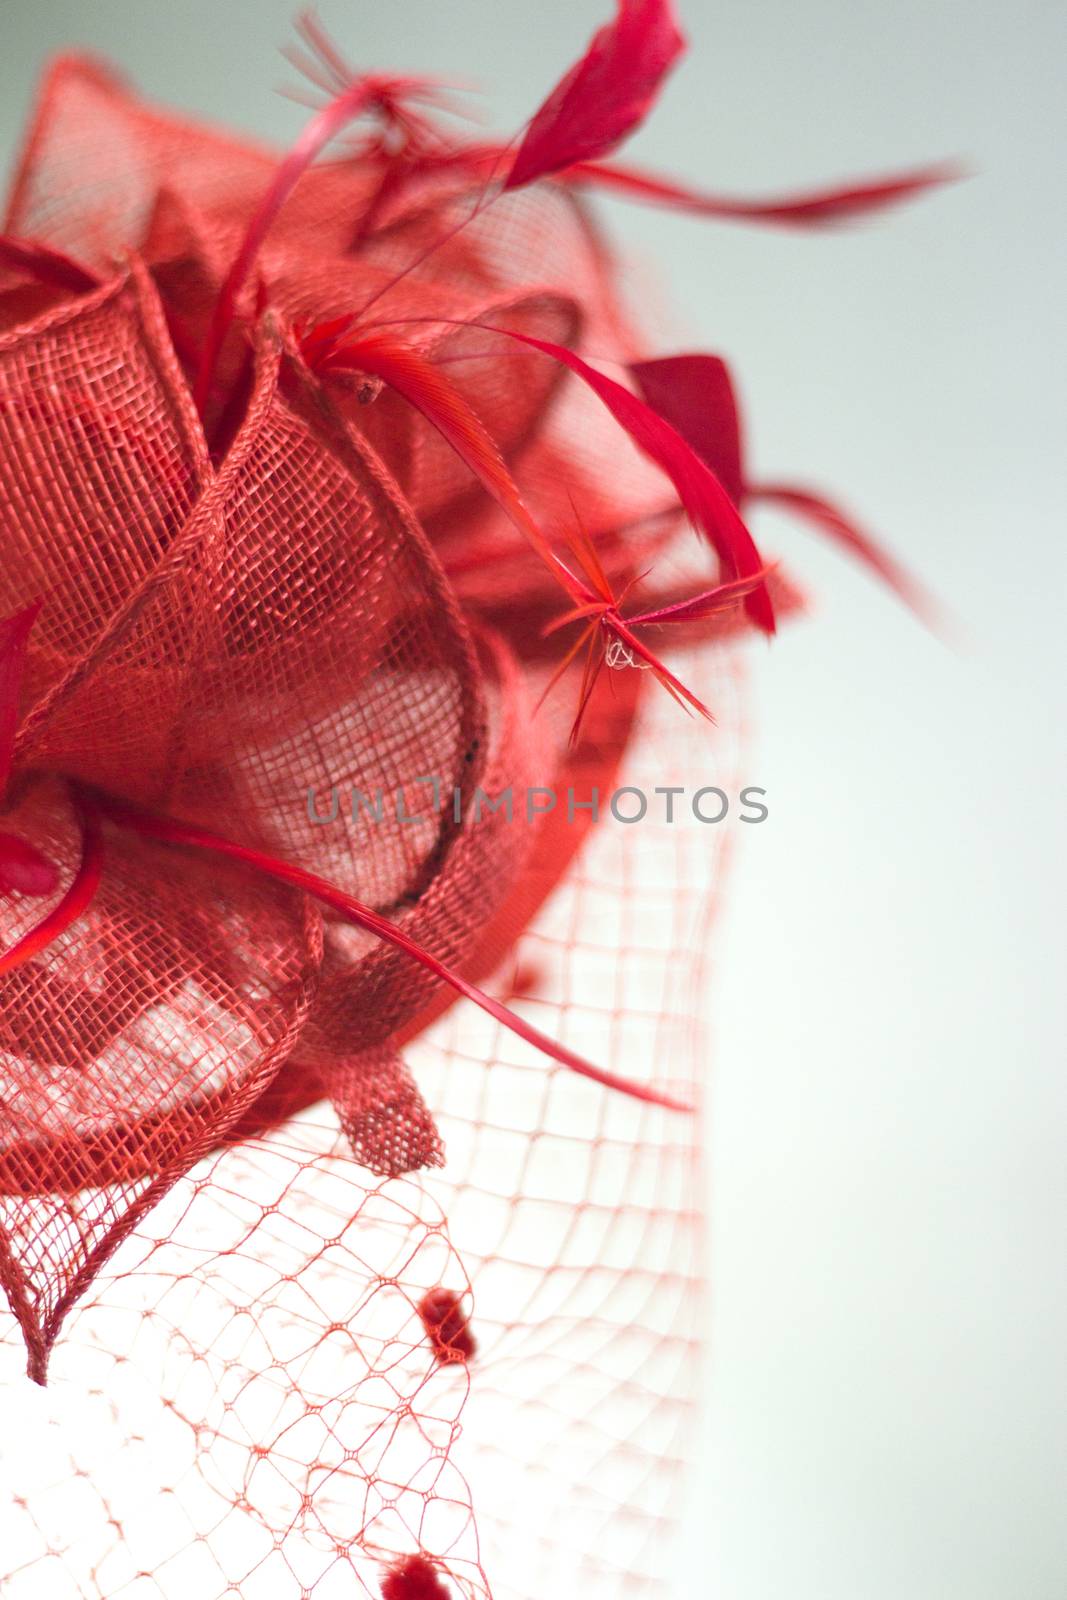 Headdress for lady hair on isolated background. No people